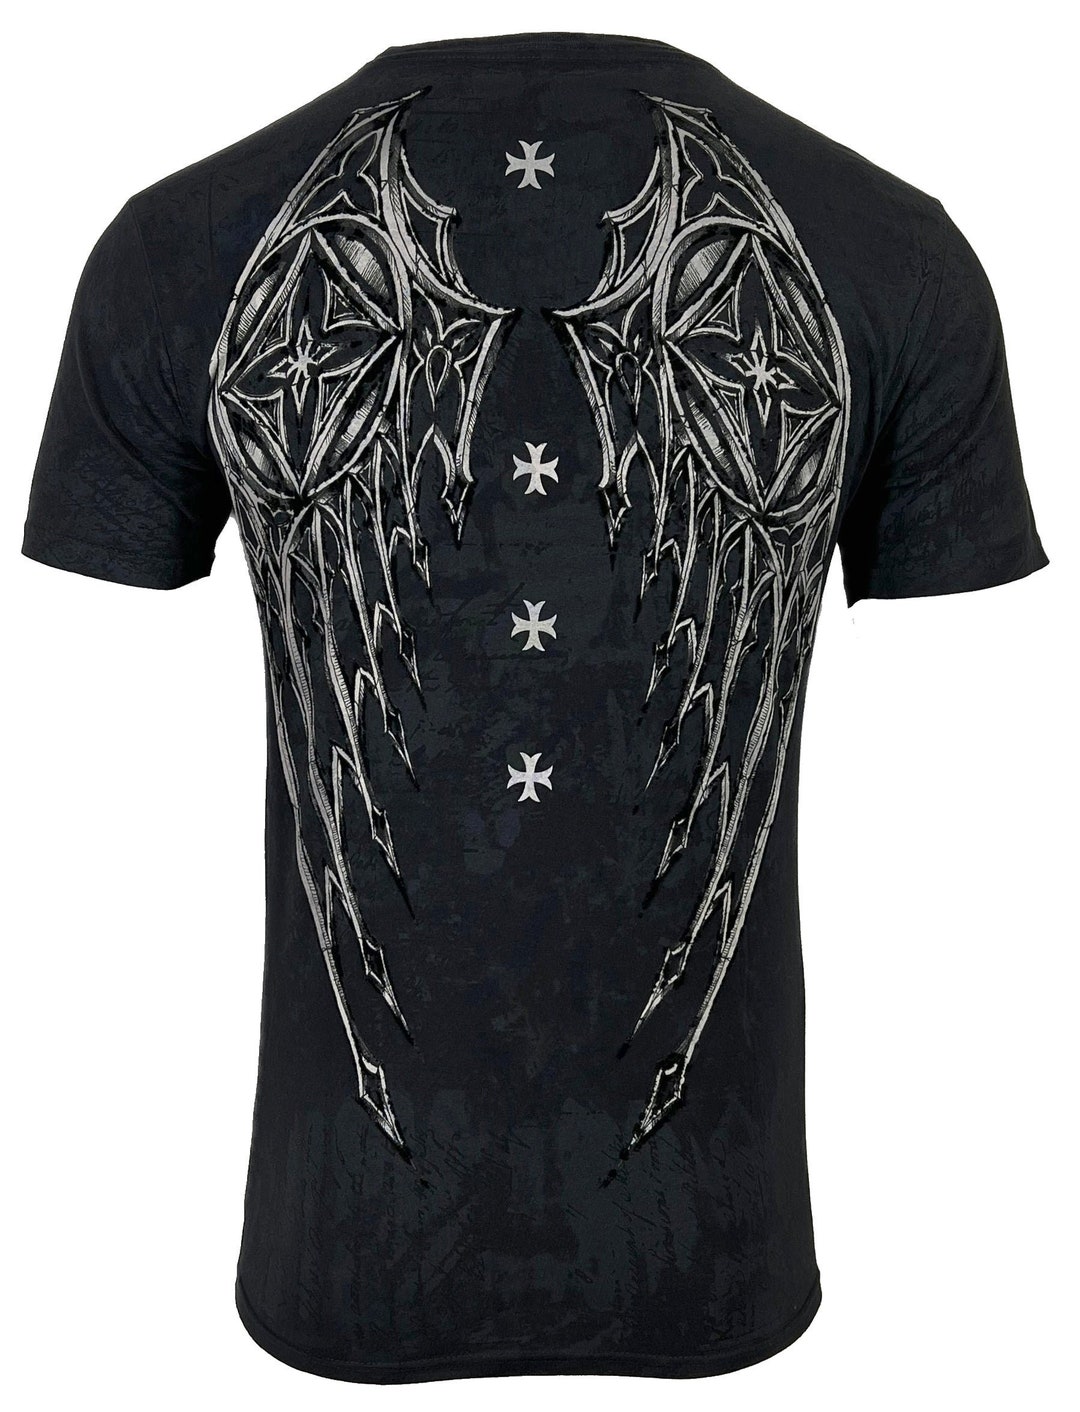 Xtreme Couture by Affliction Men's T-shirt Stone Ranger - Etsy